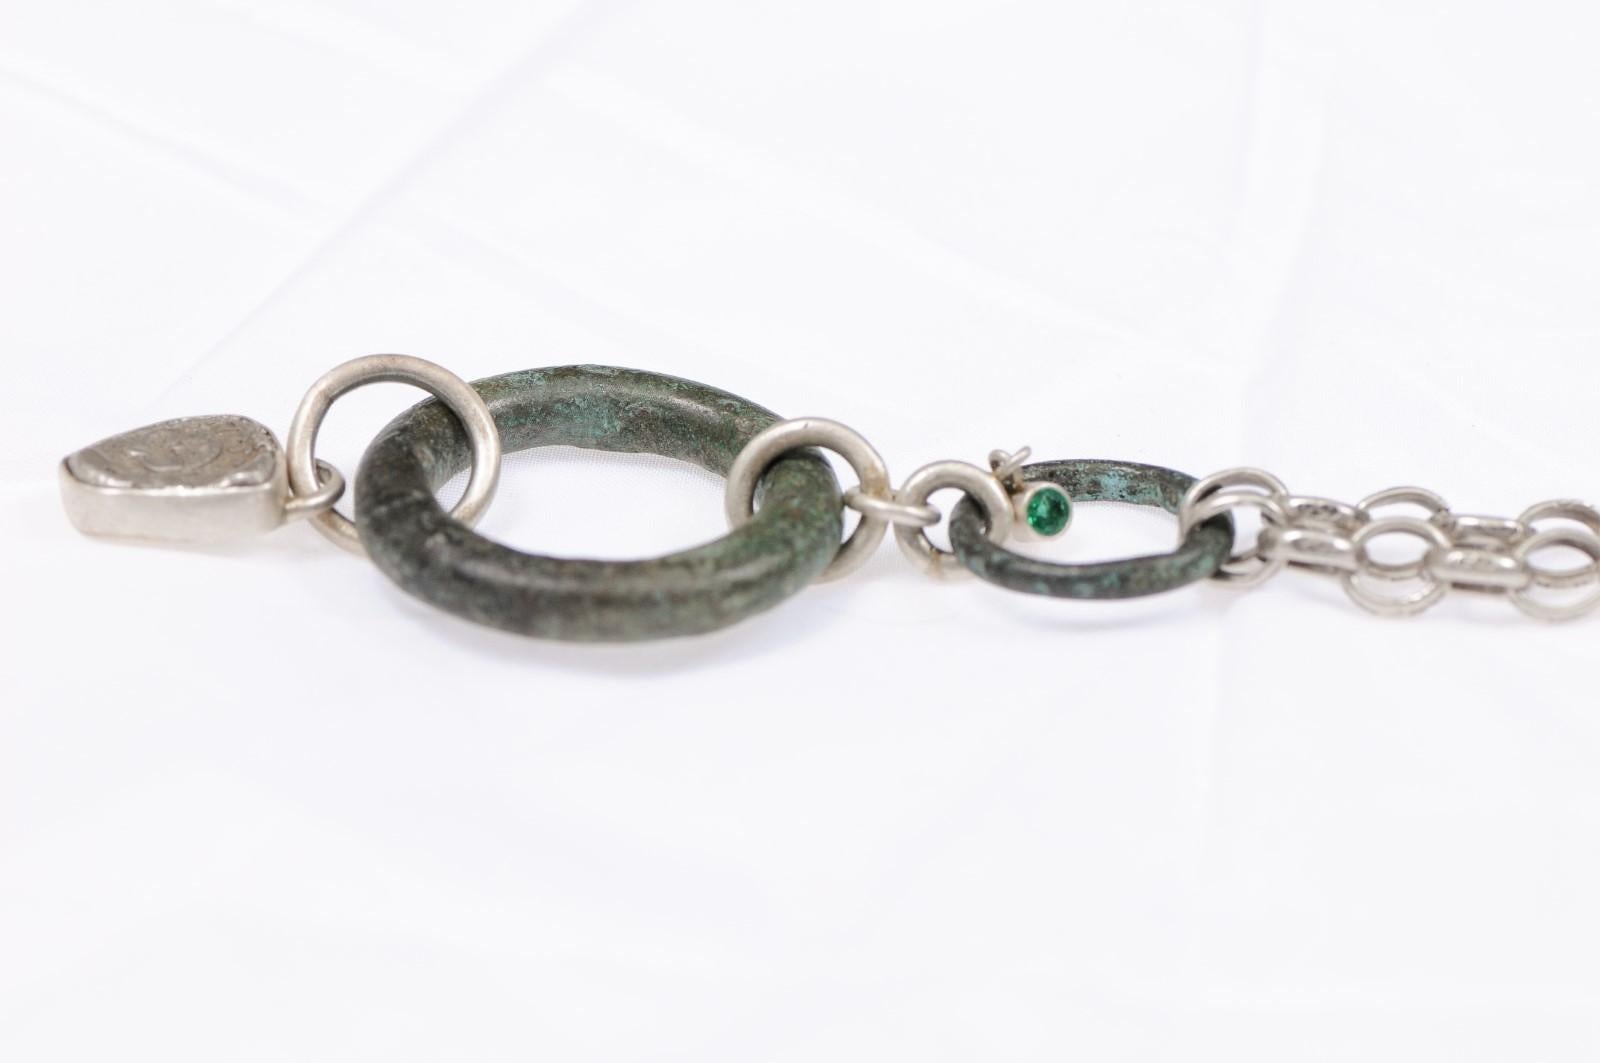 A Celtic proto-currency in bronze with emerald accent and AR Drachm Gorgoneion (coin) on a substantial sterling silver chain. The drachm is from 6th to 4th centuries BC from Thrace of ancient Greece. This coin has been inspected and approved to be